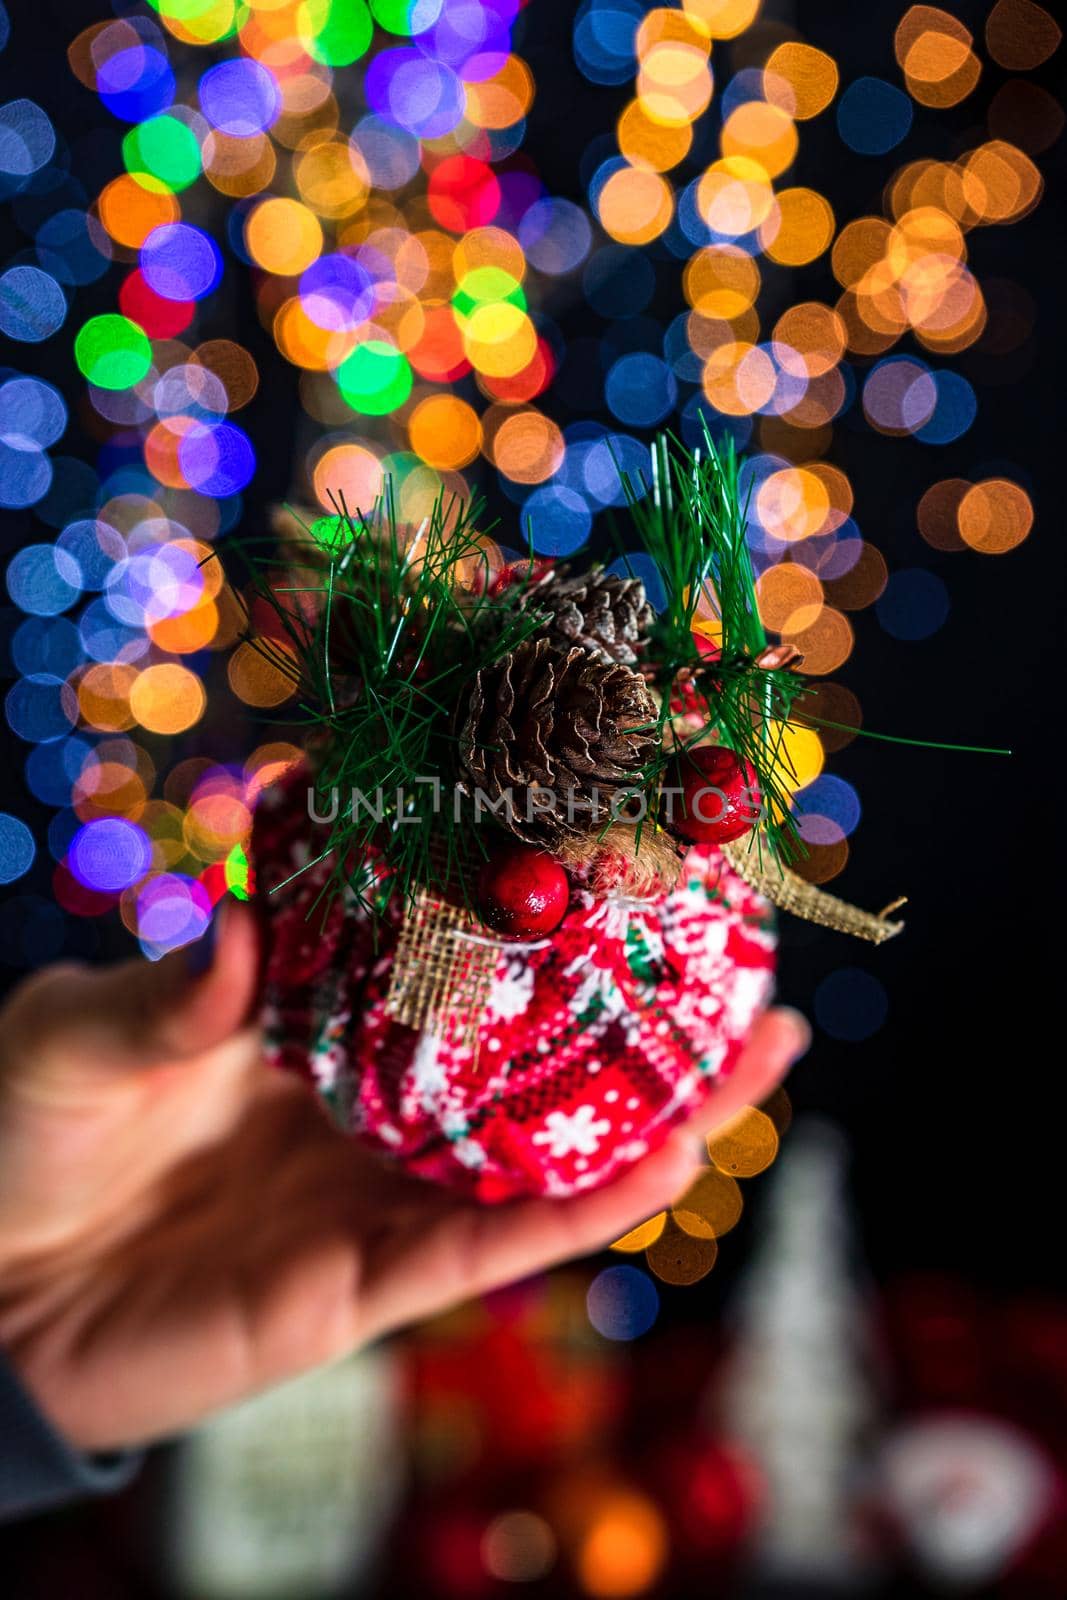 Holding Christmas bauble decoration isolated on background with blurred lights. December season, Christmas composition. by vladispas